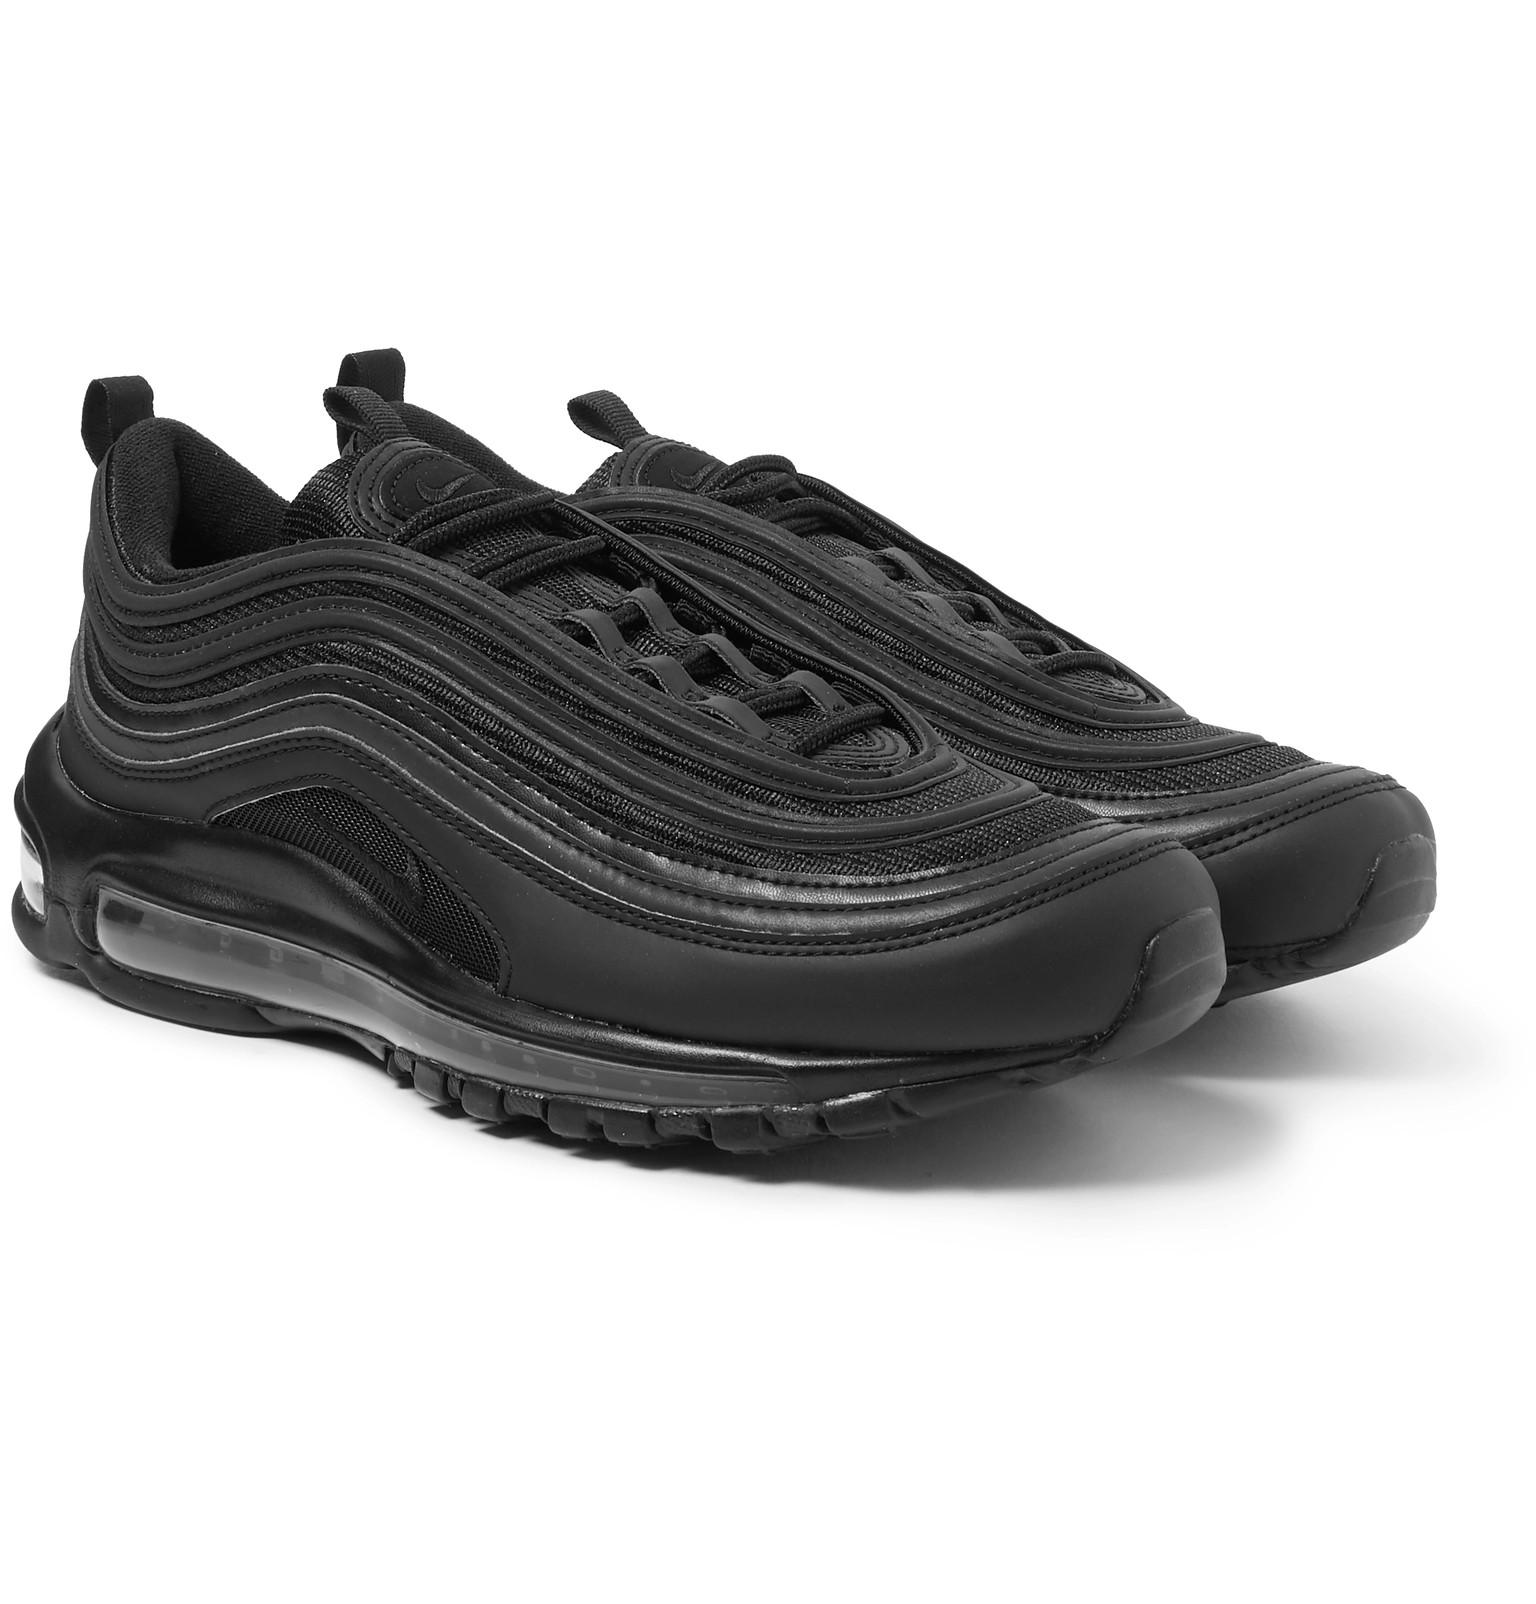 Nike Air Max 97 Faux Leather And Mesh Sneakers in Black for Men - Lyst